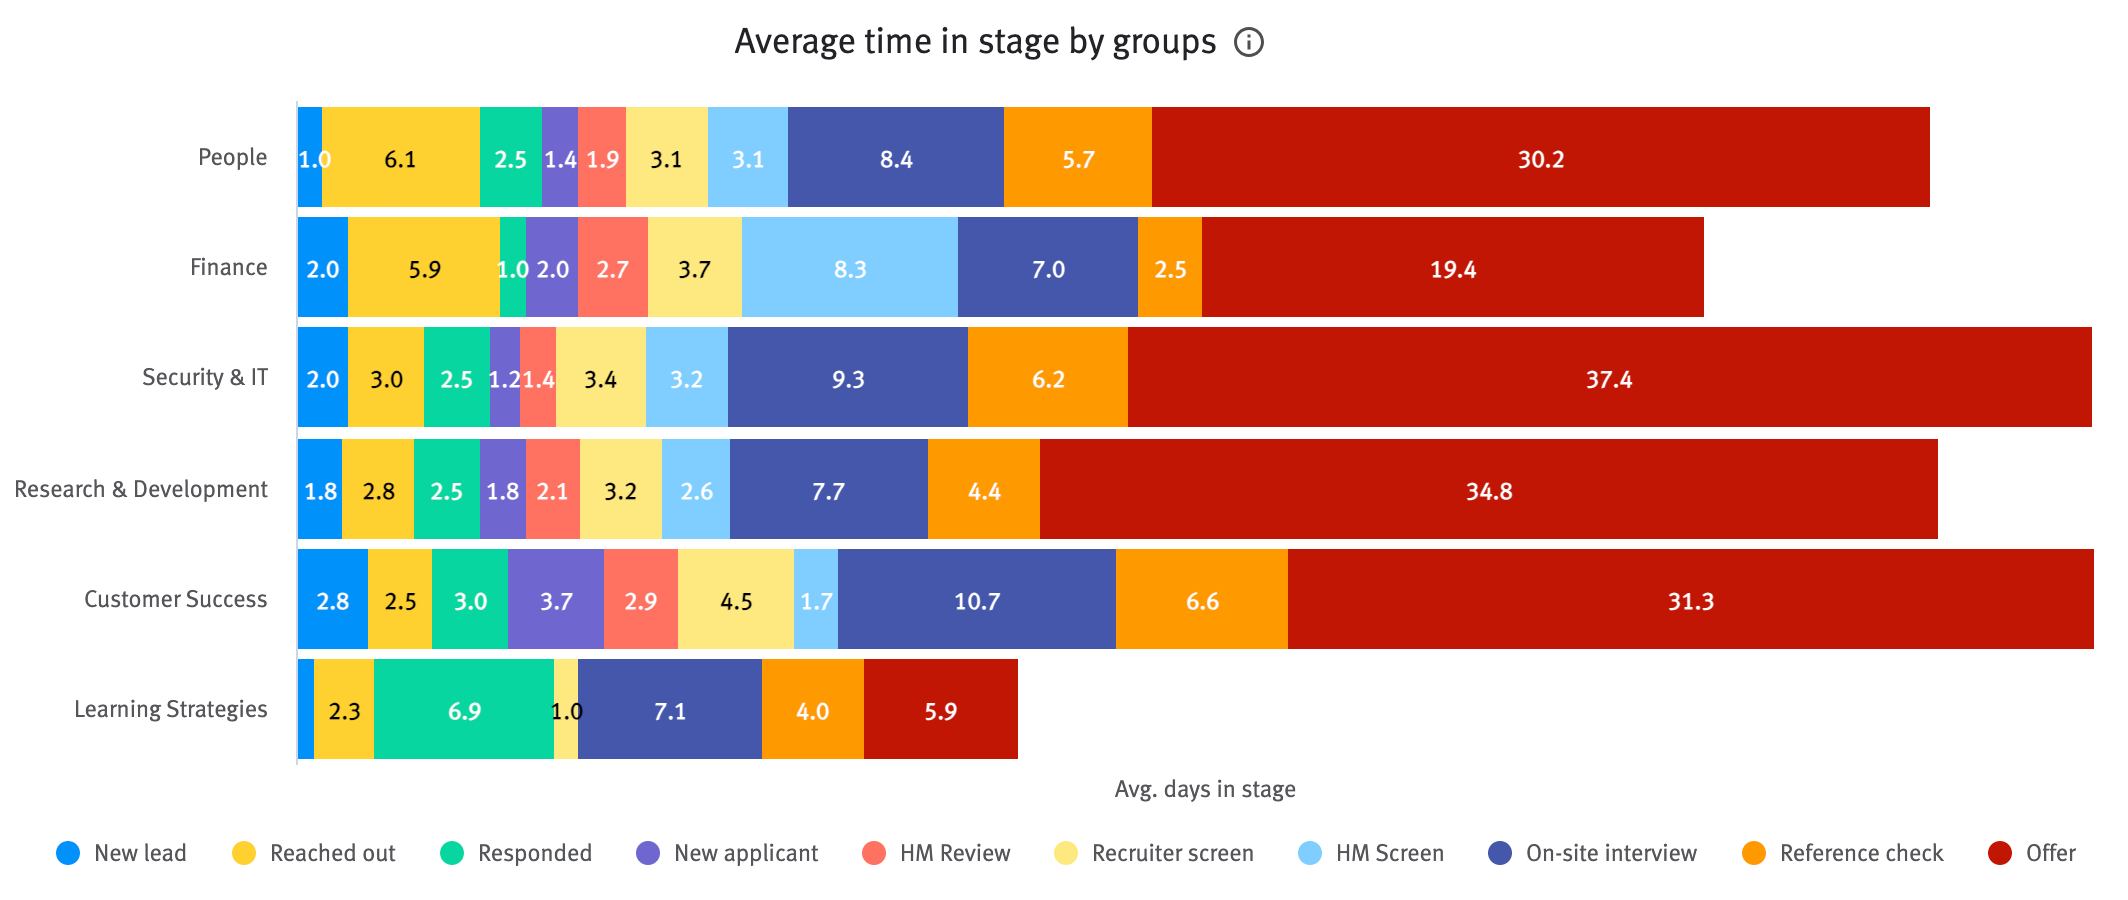 Average time in stage by groups chart